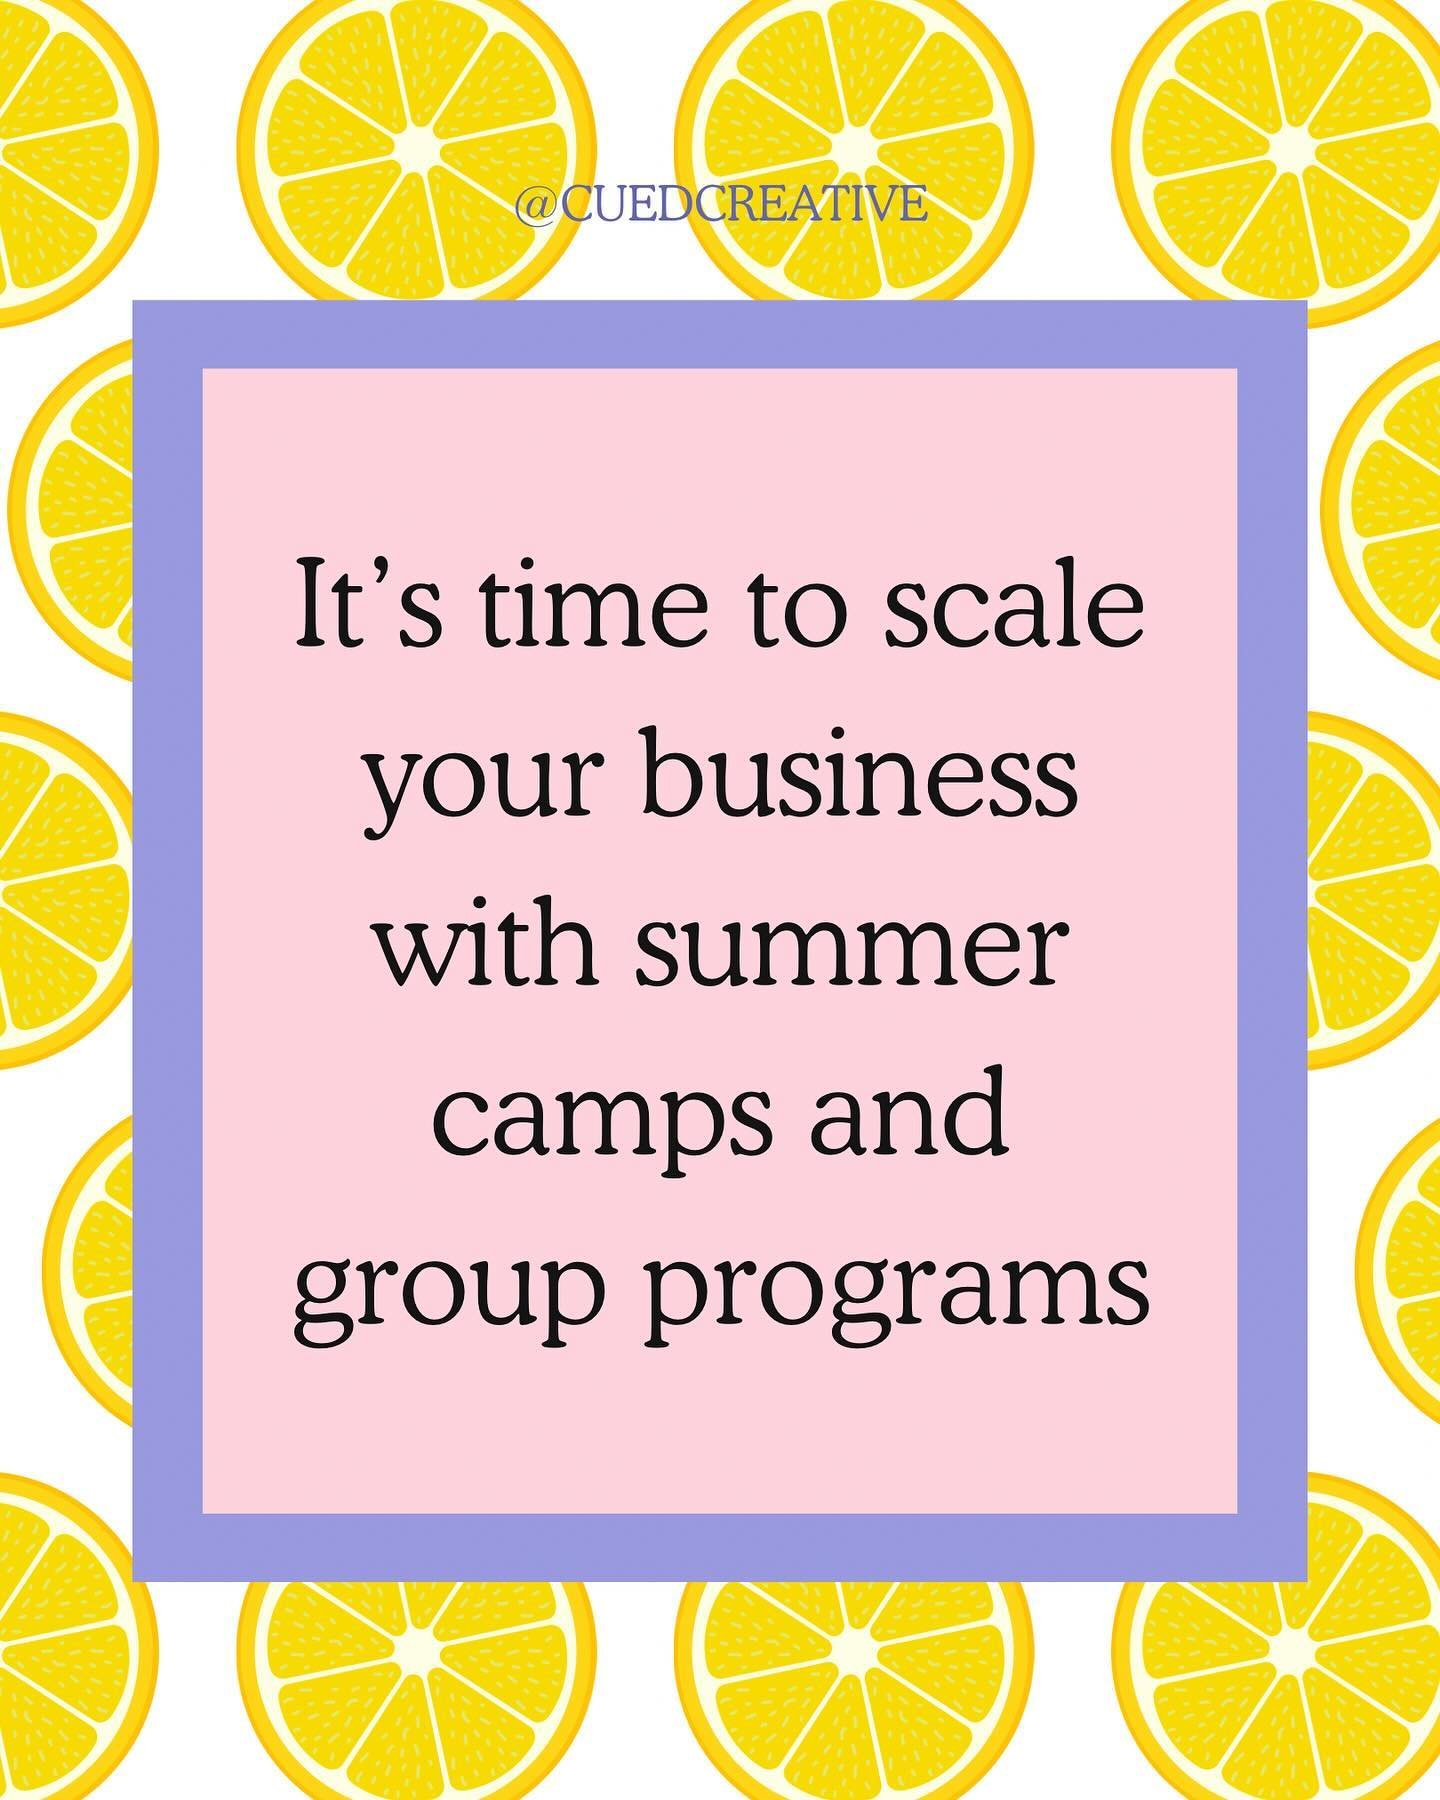 ☀️ You&rsquo;ve been asking about how to start running groups, so we cranked this course out just in time for summer! 

✅ Summer camps
✅ Workshops
✅ Parent coaching
✅ Enrichment programs
✅ Therapeutic groups
✅ Social / special interest groups
✅ Commu